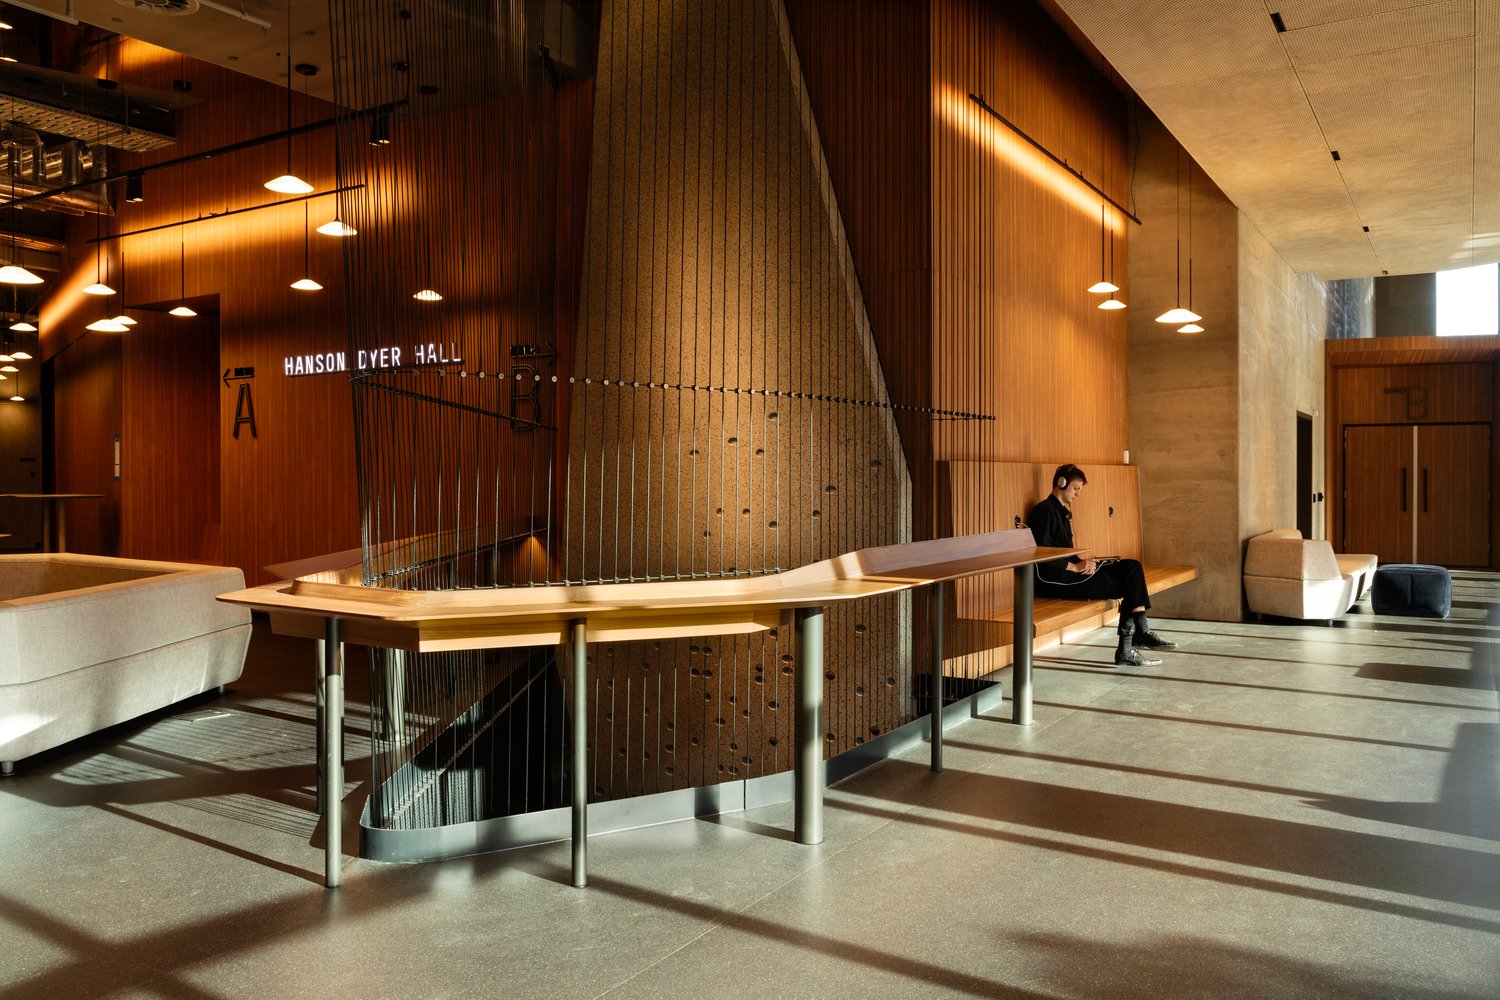 Social spaces for students, performers and visitors | Trevor Mein